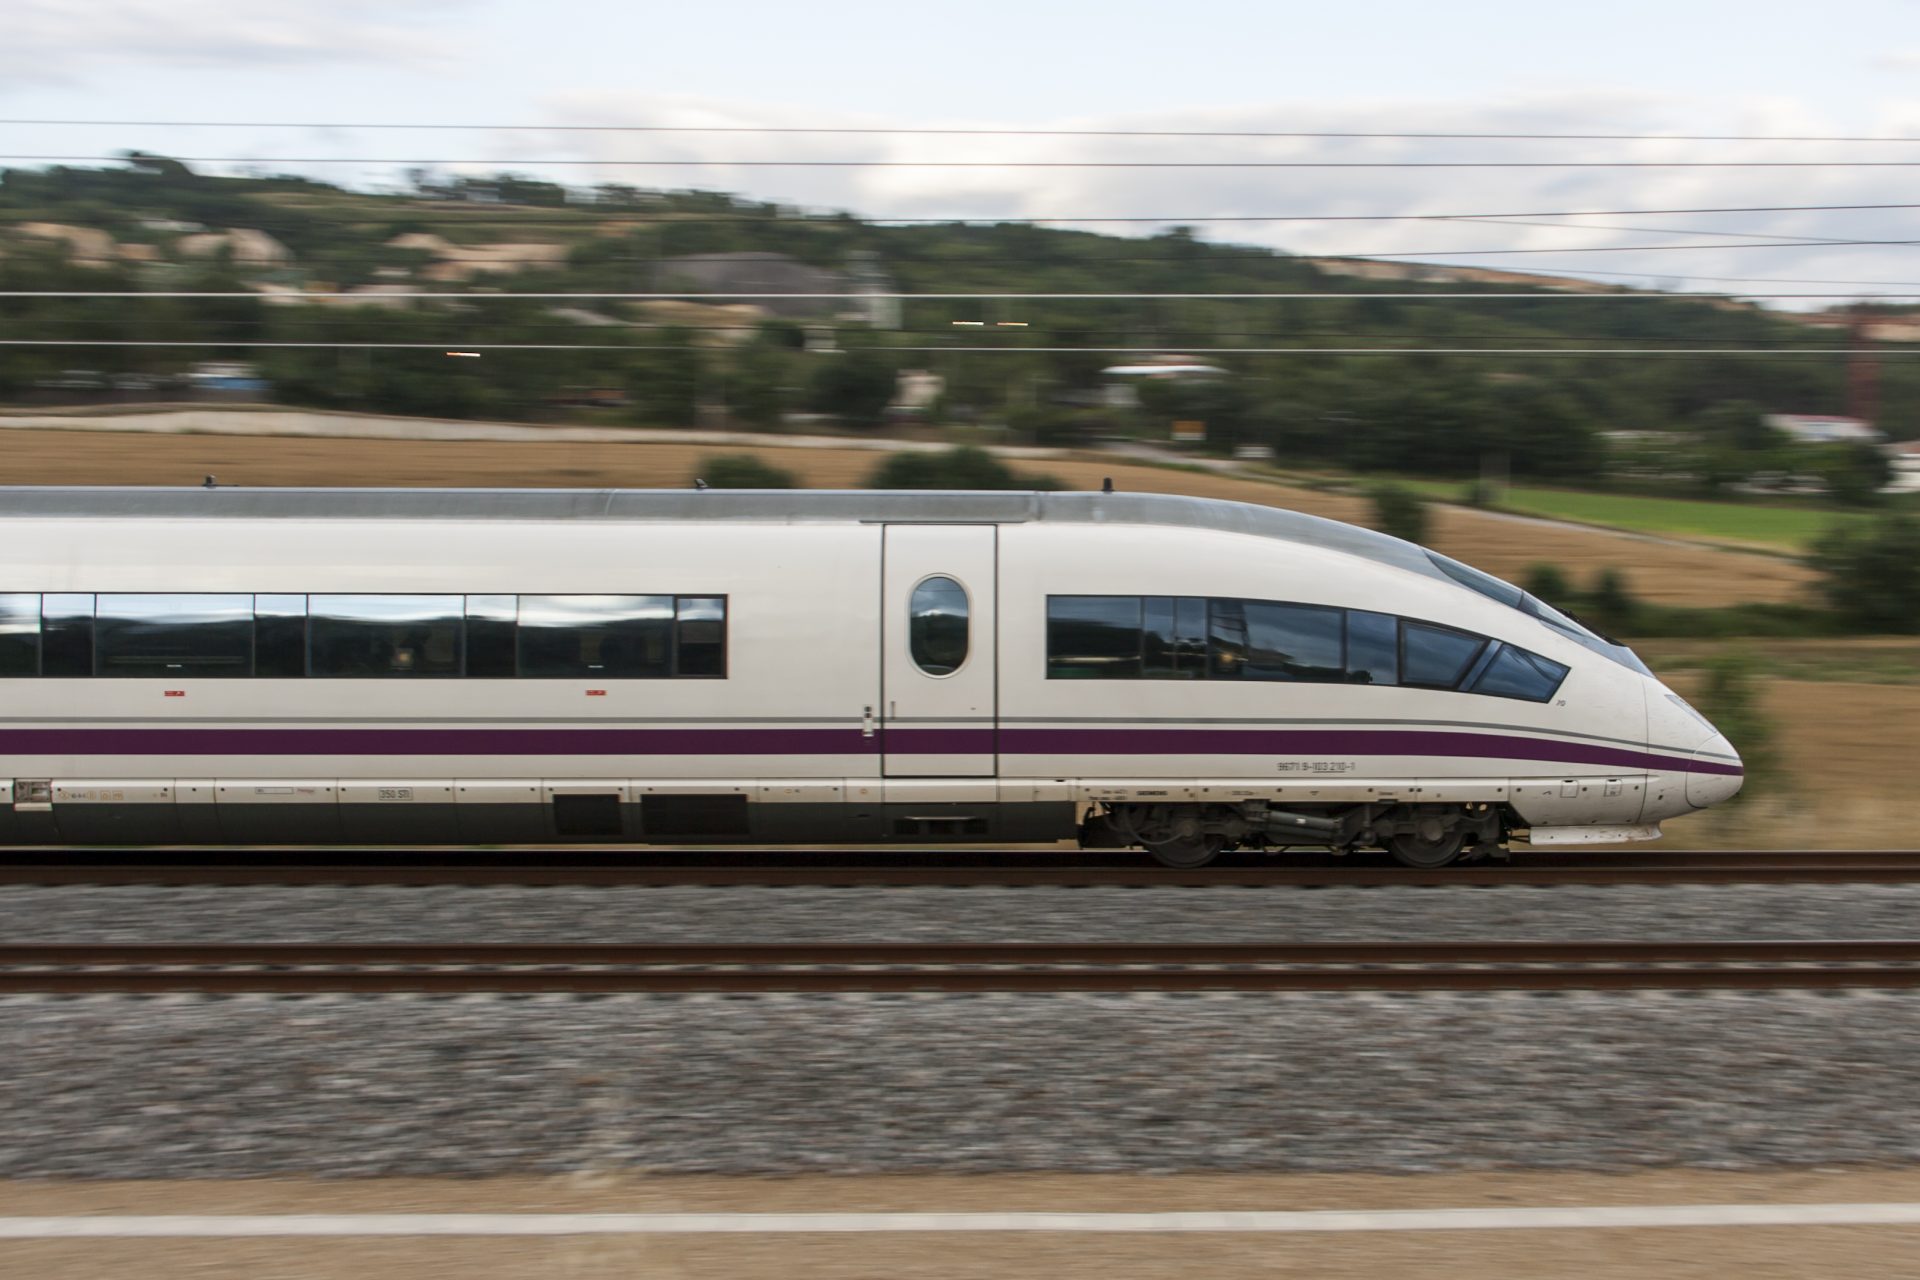 <p><span>France helped Spain to join the ranks of countries offering transportation in high-speed trains in 1992 with its TGV technology. Spain is now owner of the most extended network of long-distance lines in Europe, with dedicated high-speed trains travelling from Madrid to Seville, Malaga, Valencia, Galicia and Barcelona. </span></p>